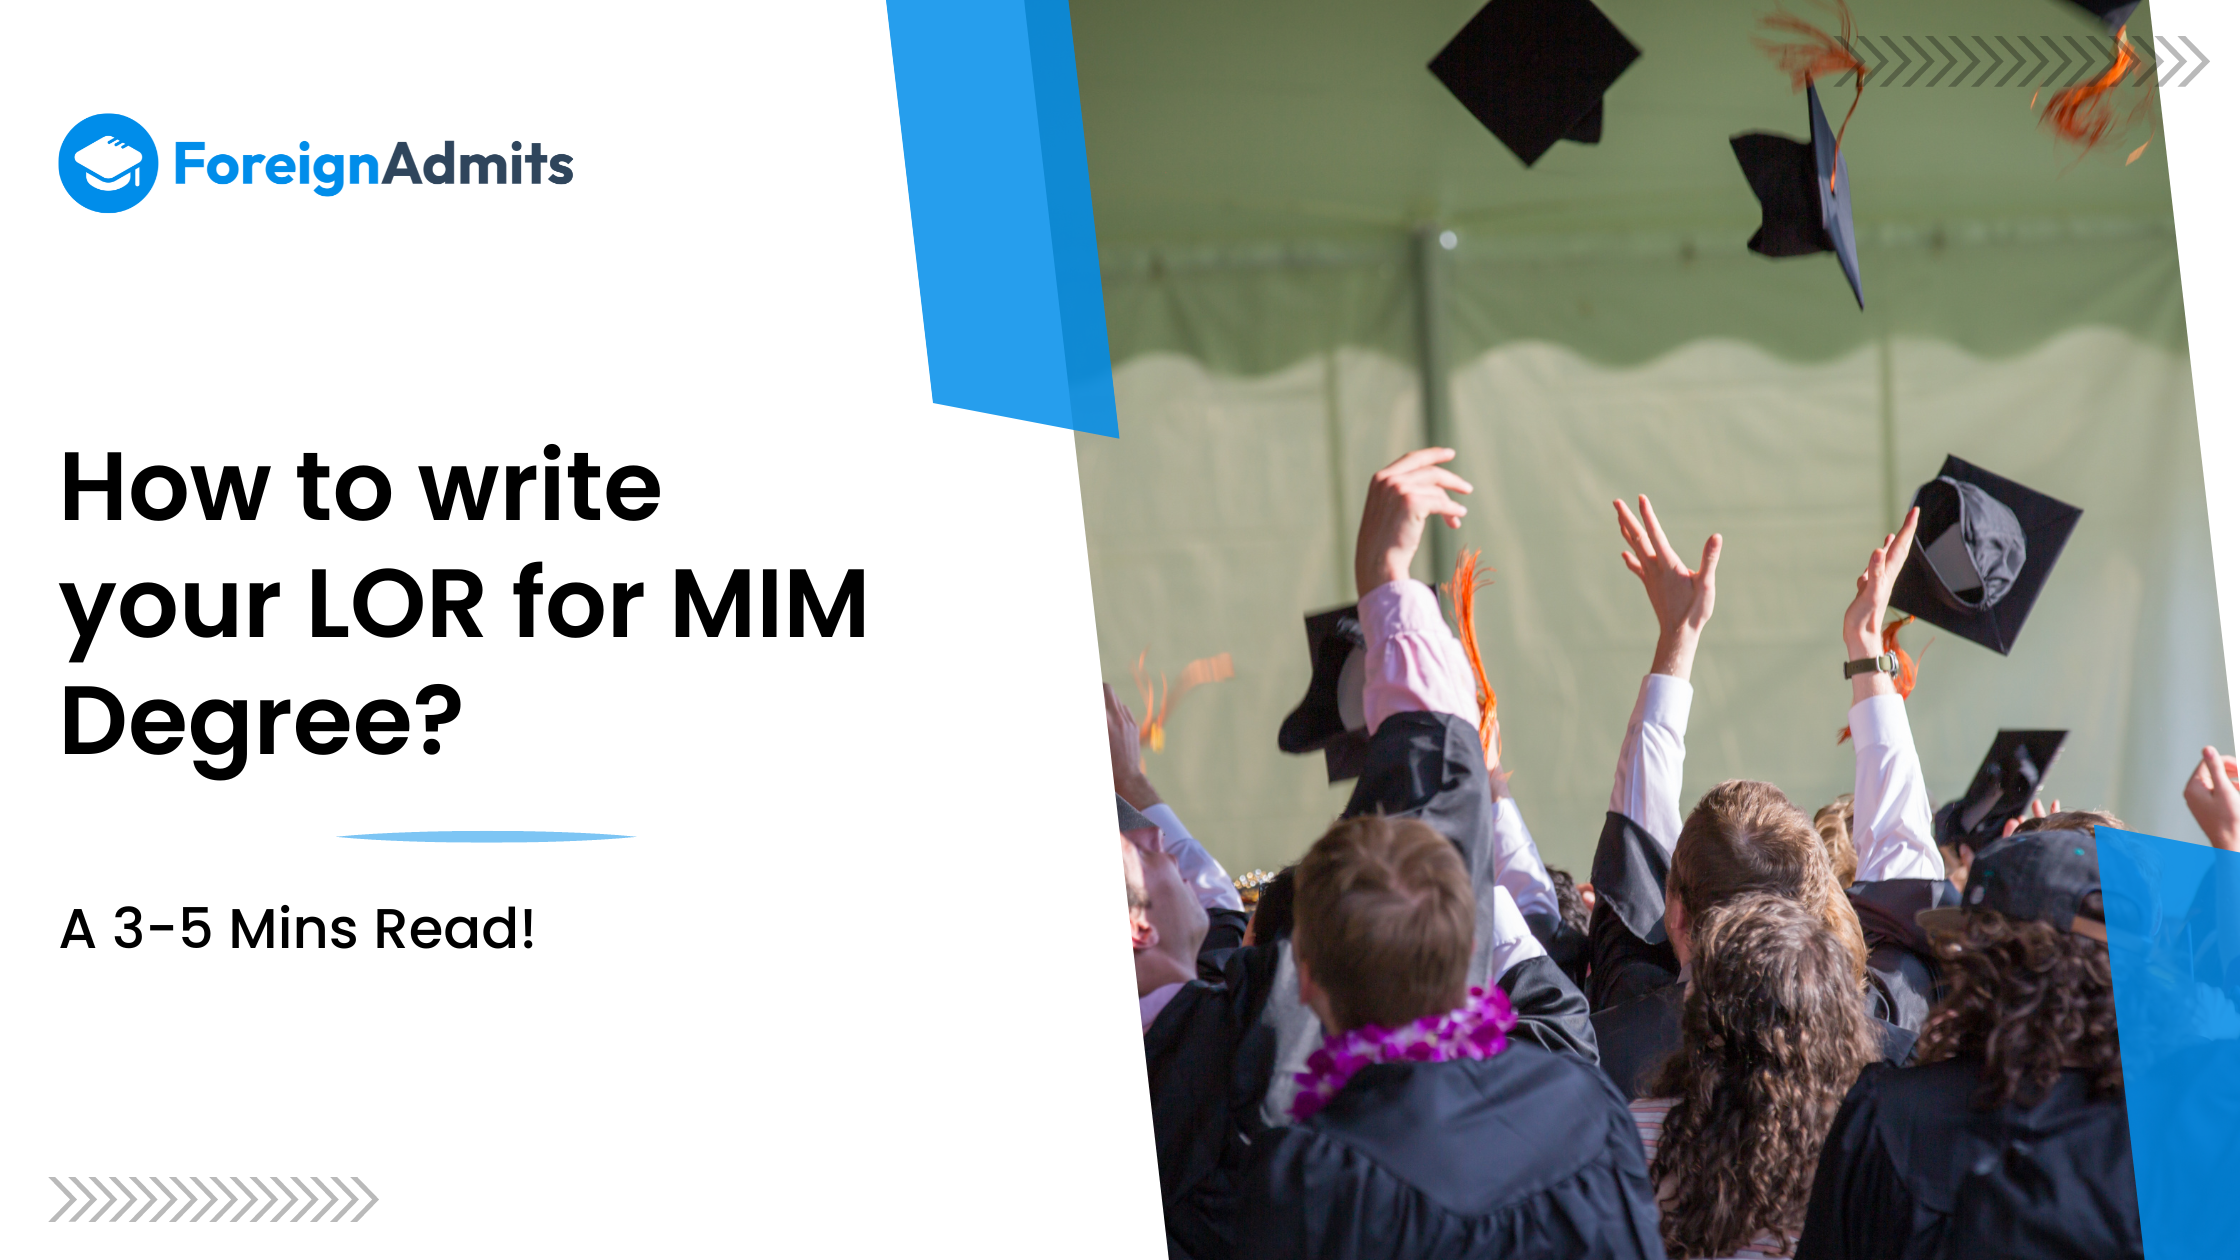 How to write your LOR for a MIM degree?